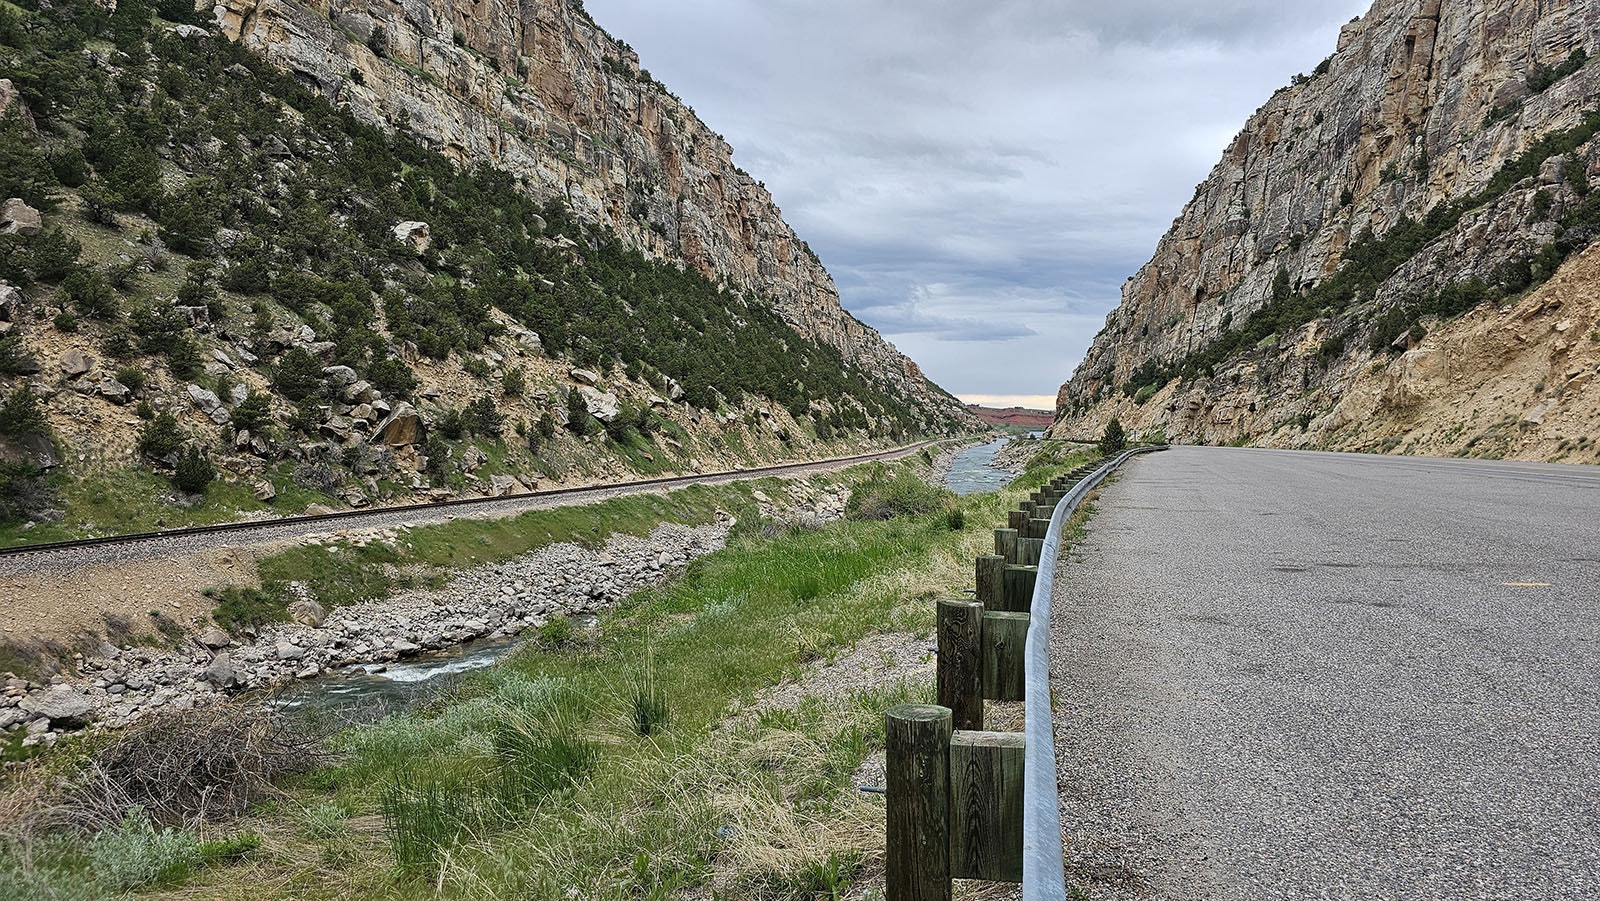 Off in the distance, the 200 million-year-old Chugwater formation at the beginning of the Wind River Canyon's scenic byway from Thermopolis.